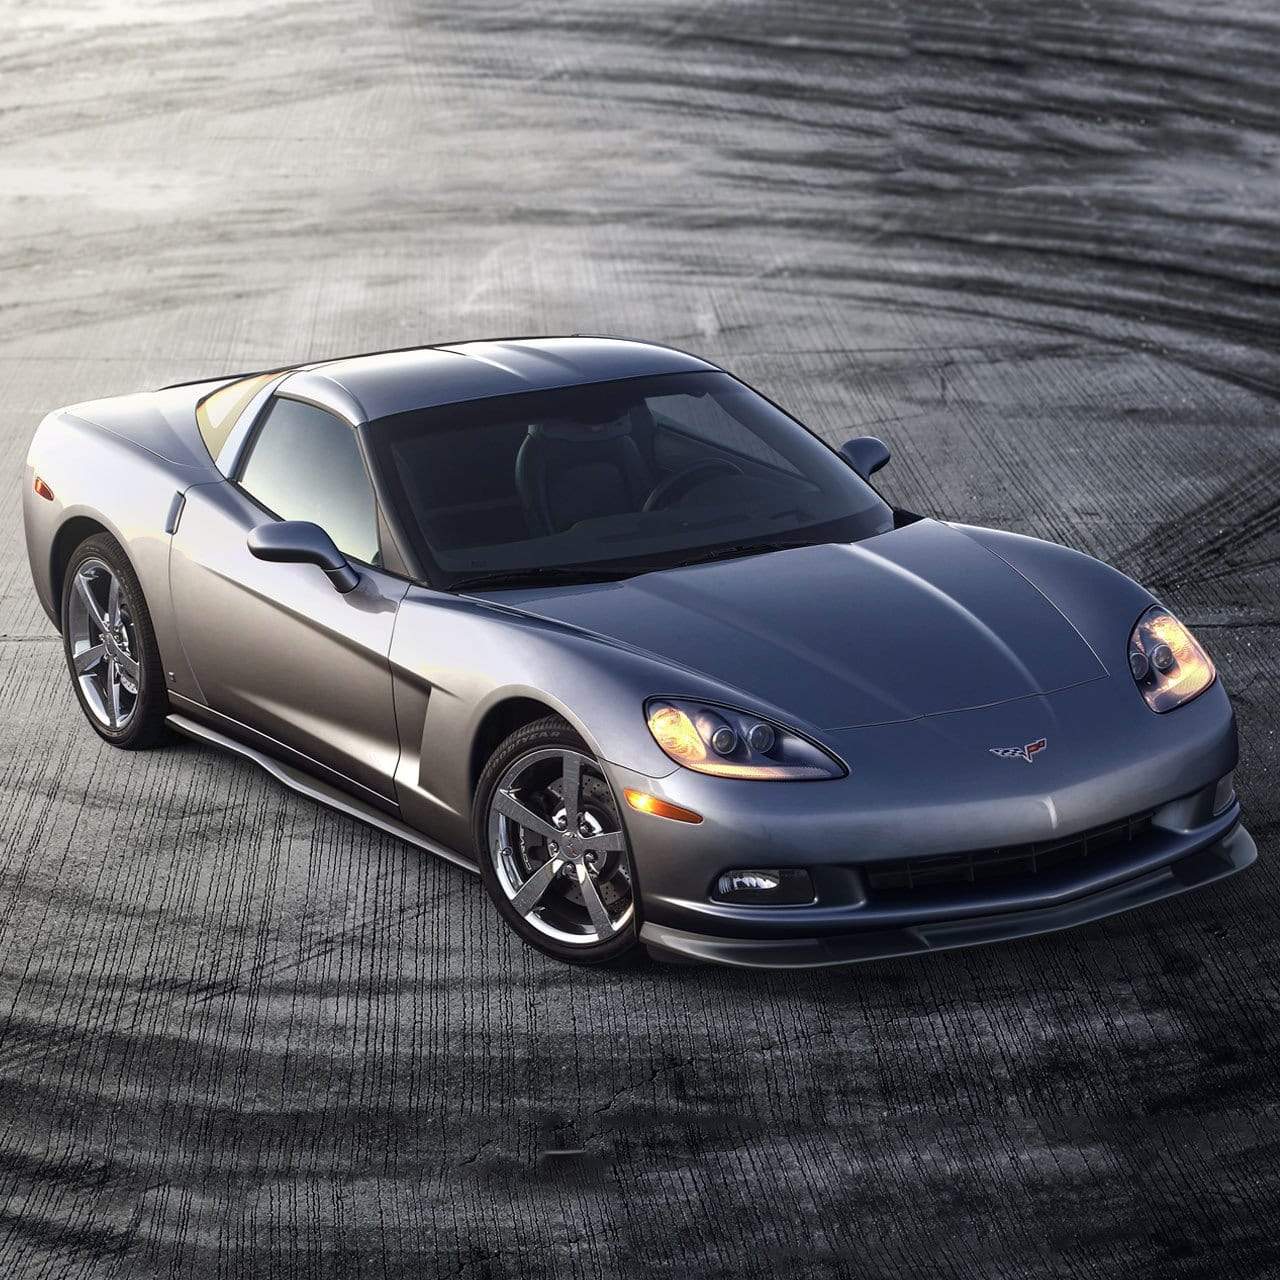 ACS Composite Zero6 Side Rockers for C6 Corvette Non-Wide Body, SKU 27-4-041CFZ - Curved profile for easy entry, increased downforce, and reduced rock chipping.